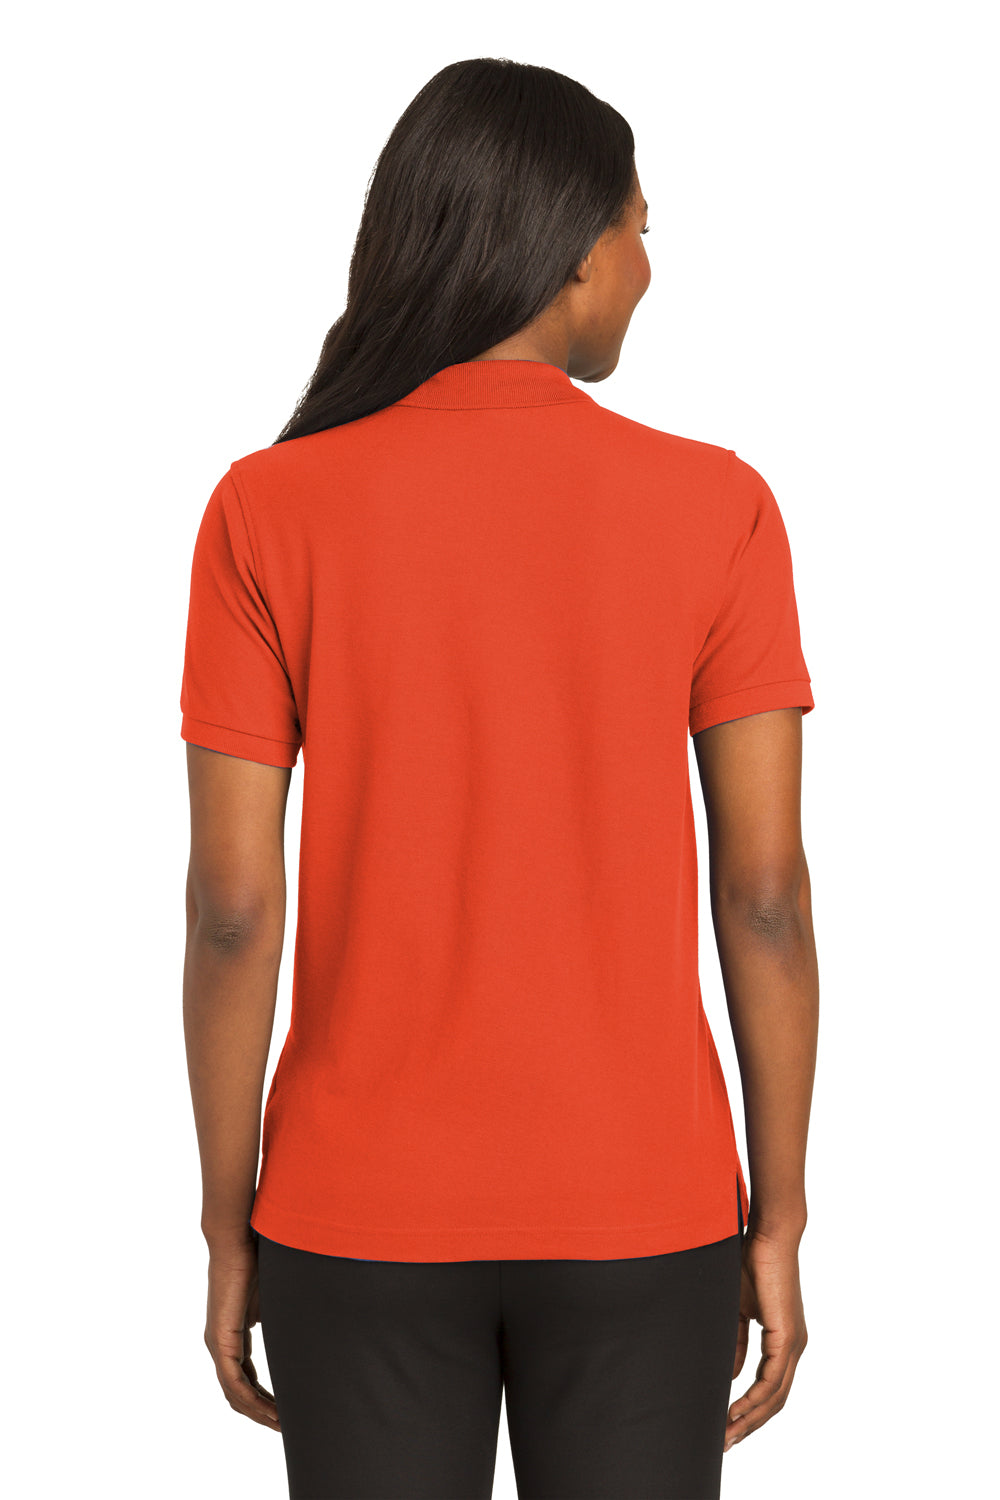 Port Authority L500 Womens Silk Touch Wrinkle Resistant Short Sleeve Polo Shirt Orange Back